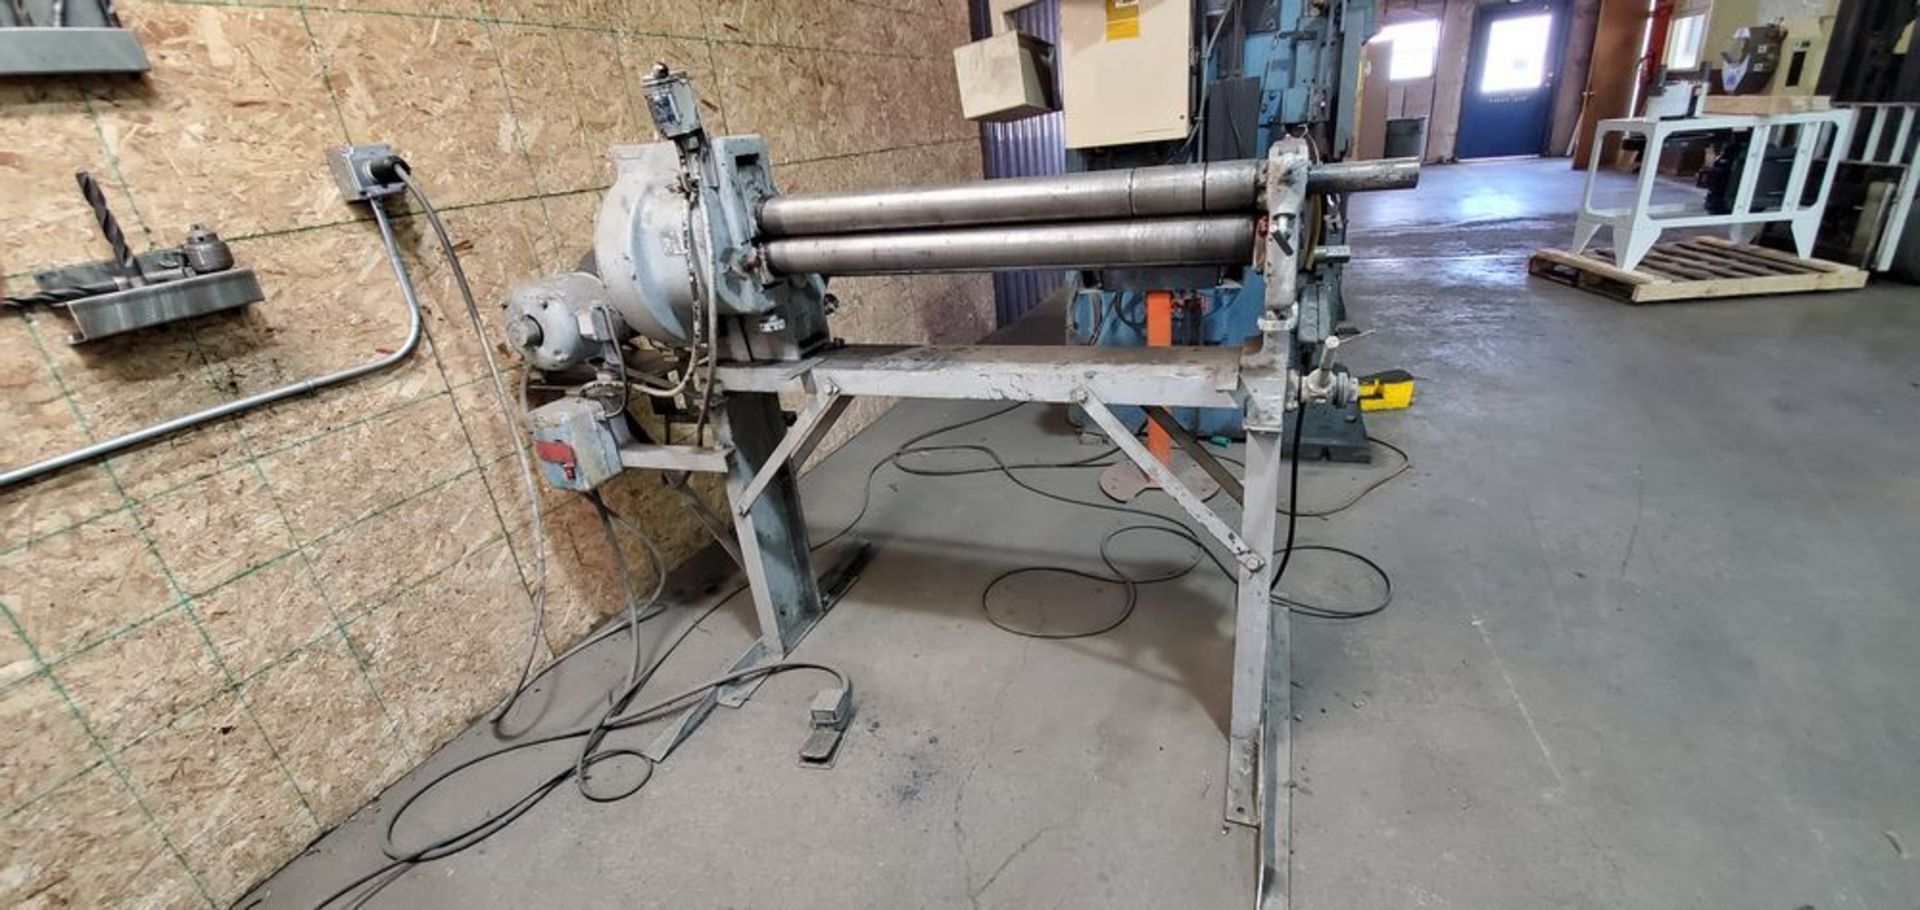 Located in Canon City, CO -- Pexto Slip Roll Machine 36" wide w/3"rolls, in operation, (can be